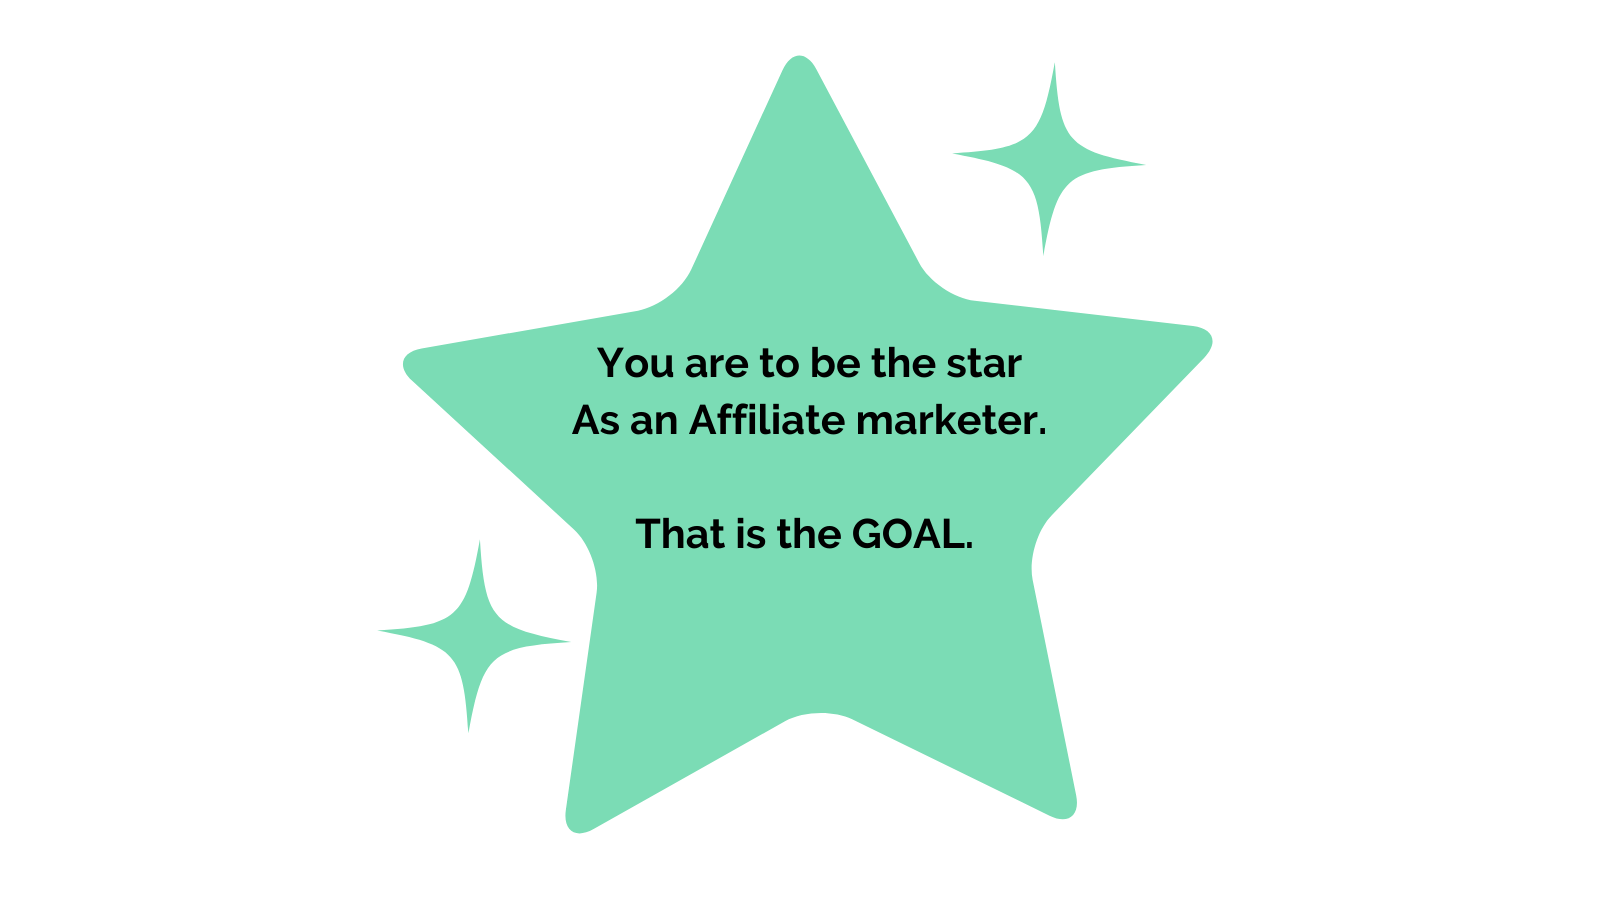 Who is an affiliate marketer